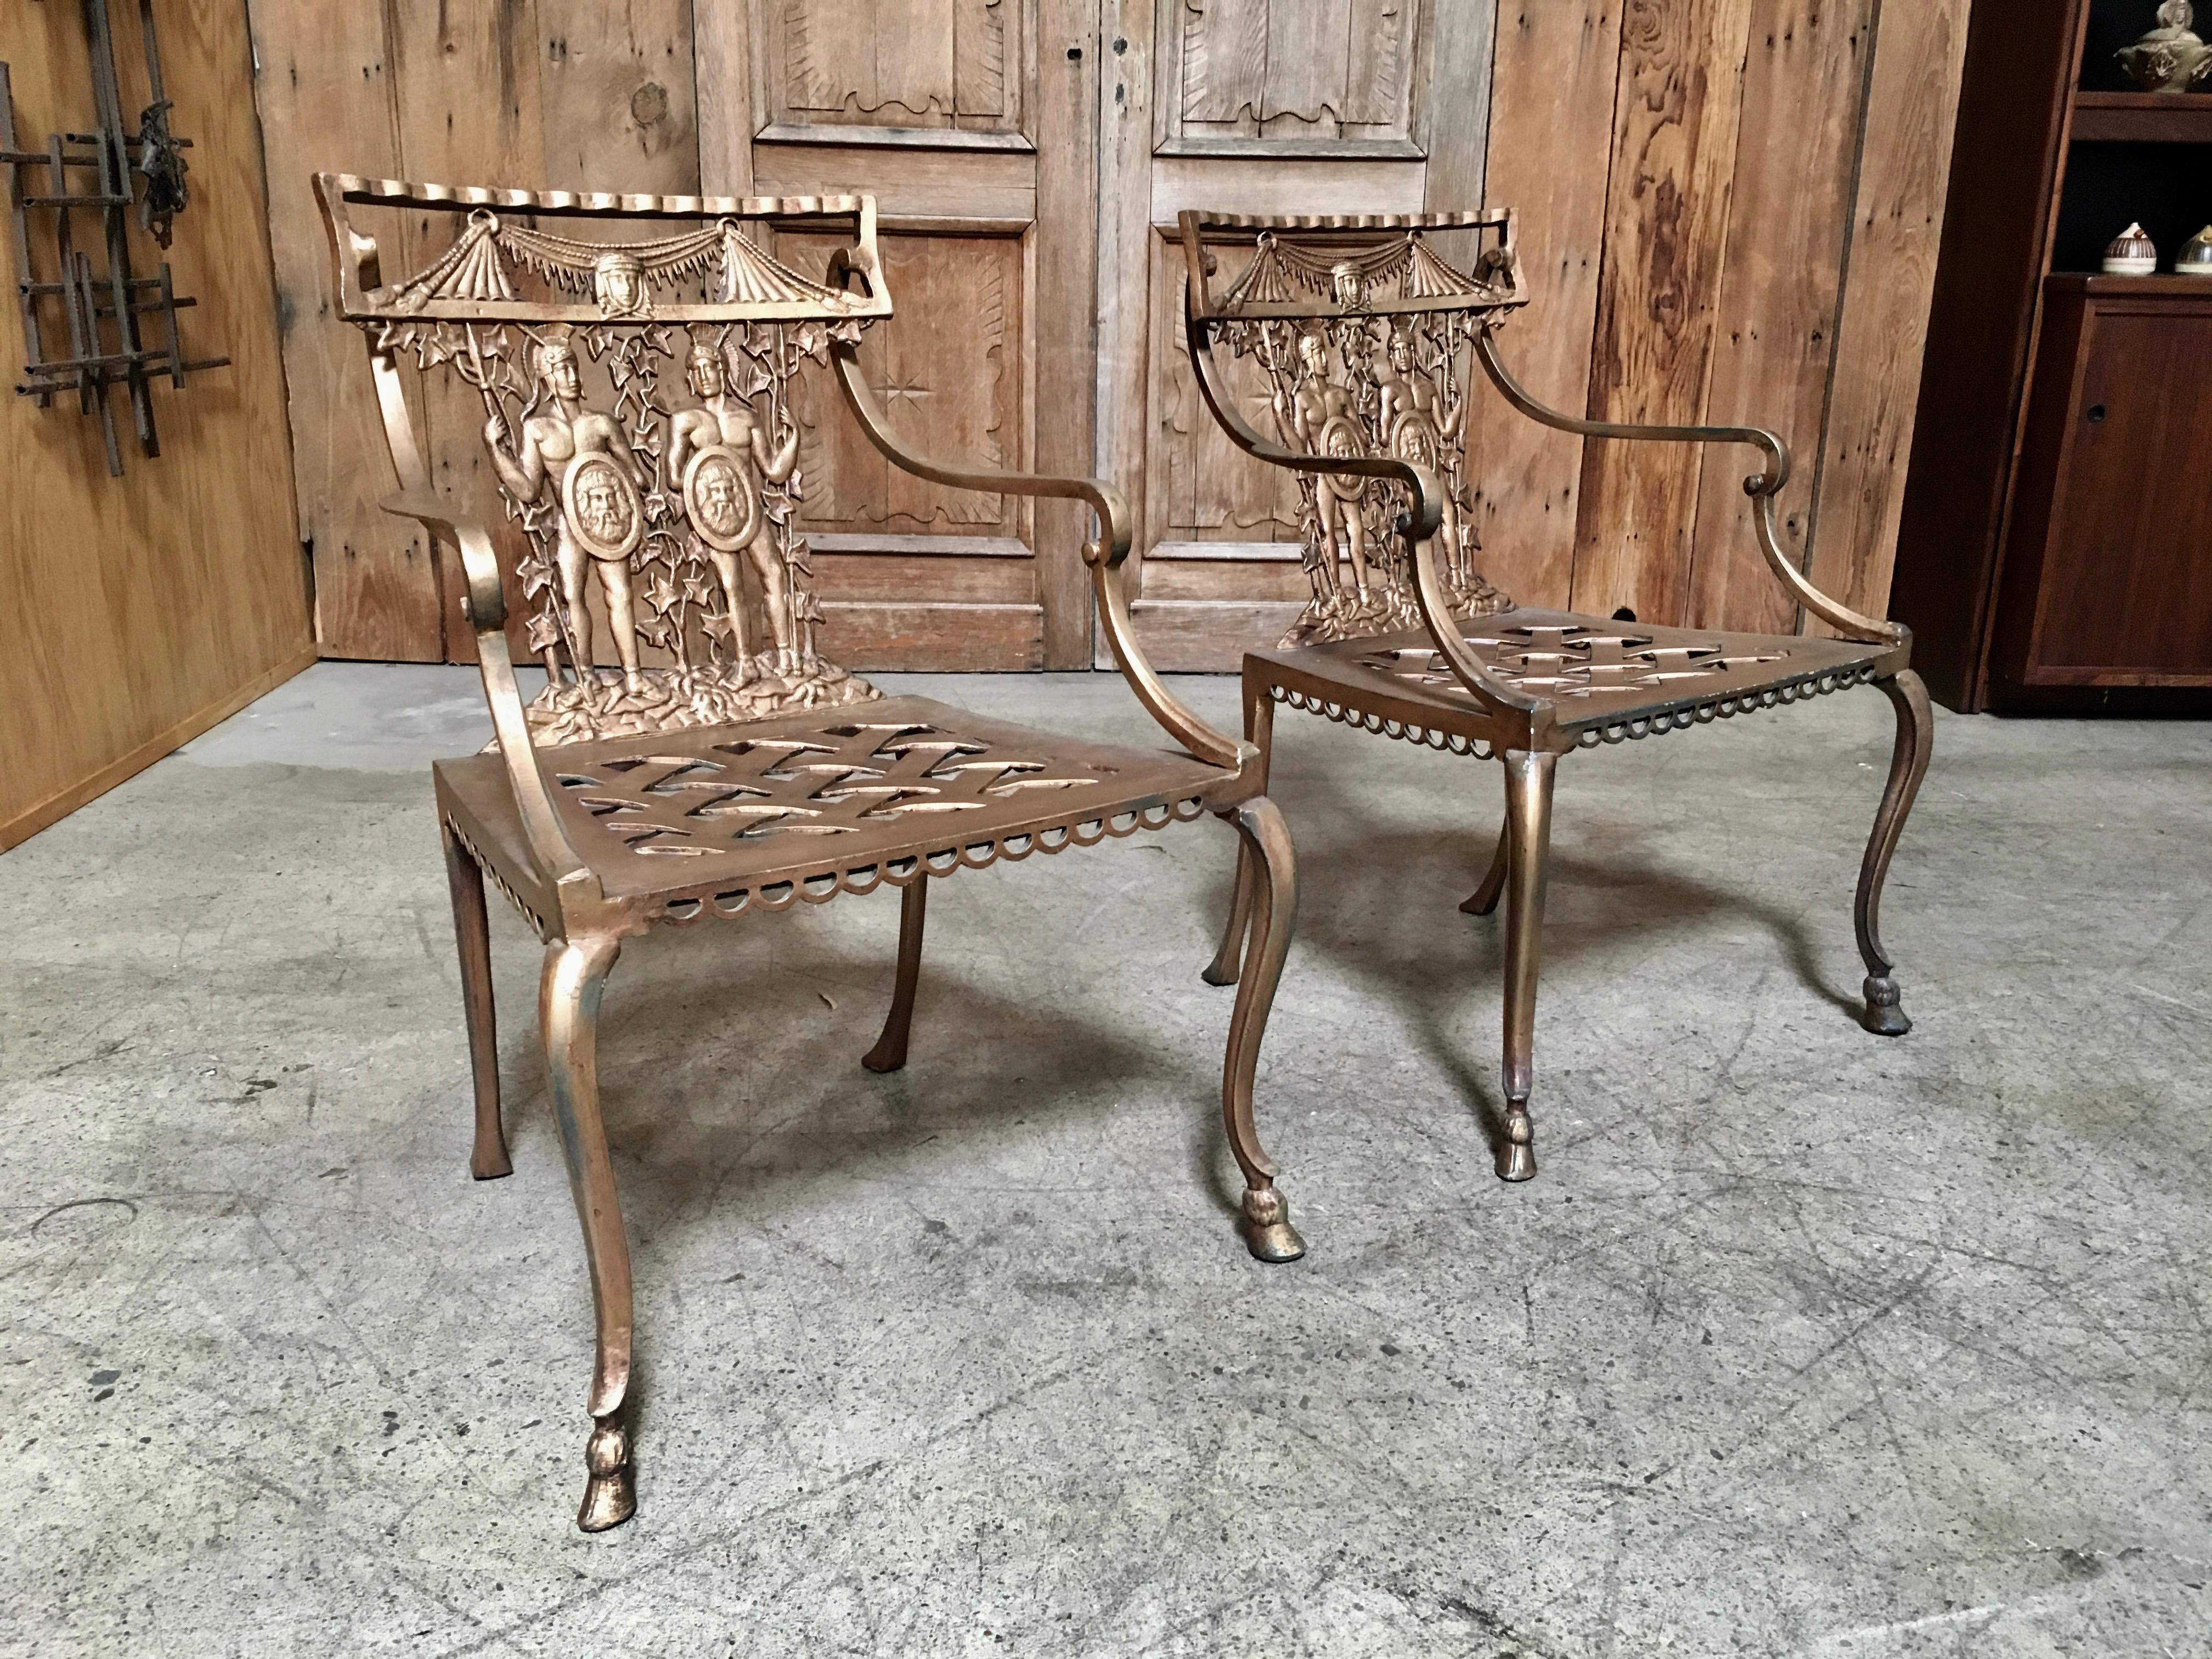 Cast metal patio chairs with naked Roman warriors in a gold bronze finish and basket weave seat made in Mexico.